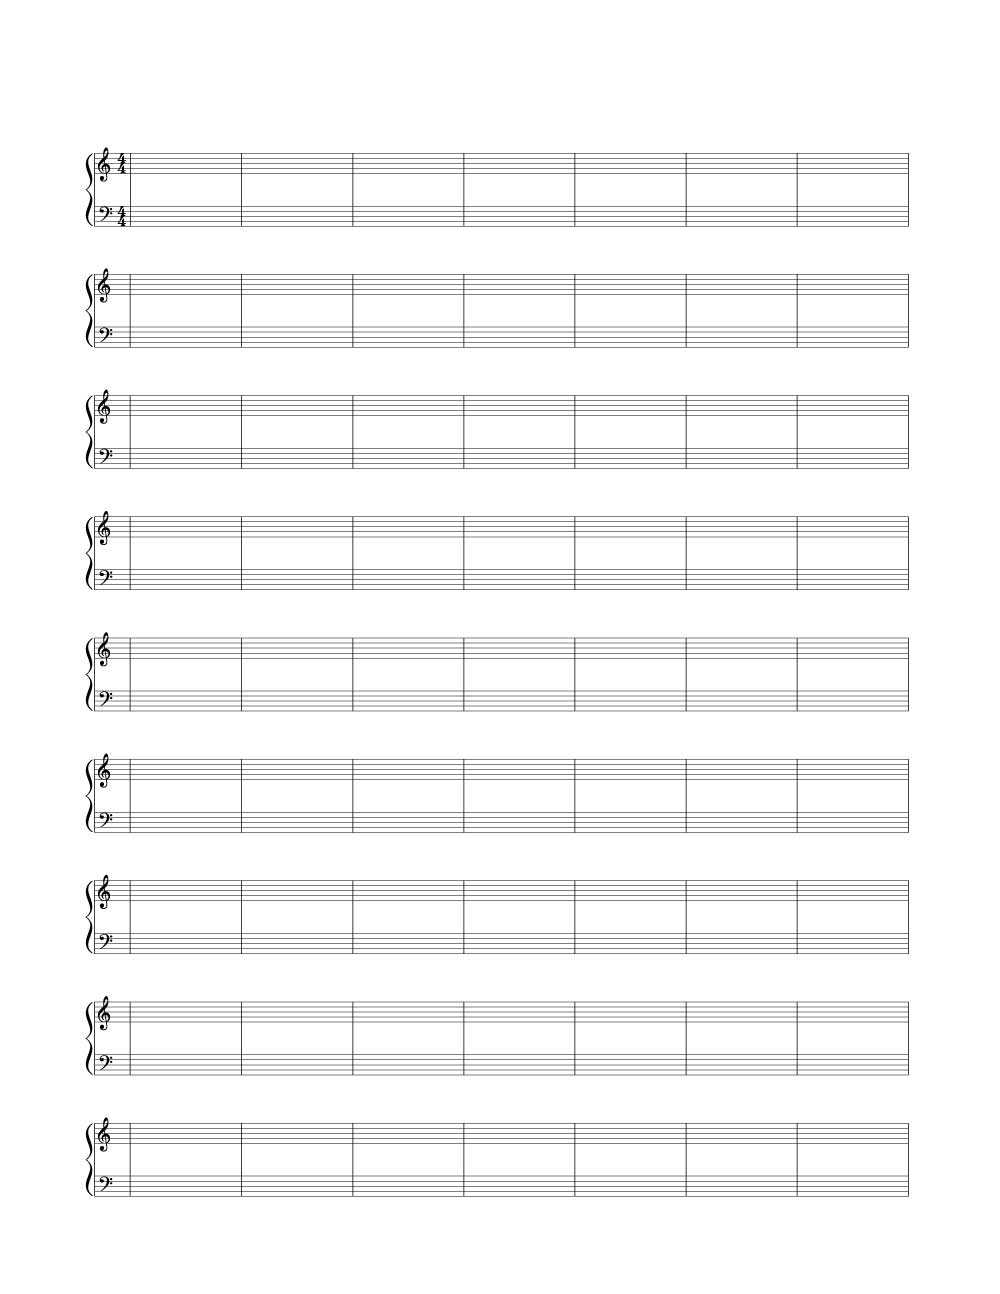 4/4 Time Signature Double Bar Blank Sheet Music | Woo! Jr Pertaining To Blank Sheet Music Template For Word